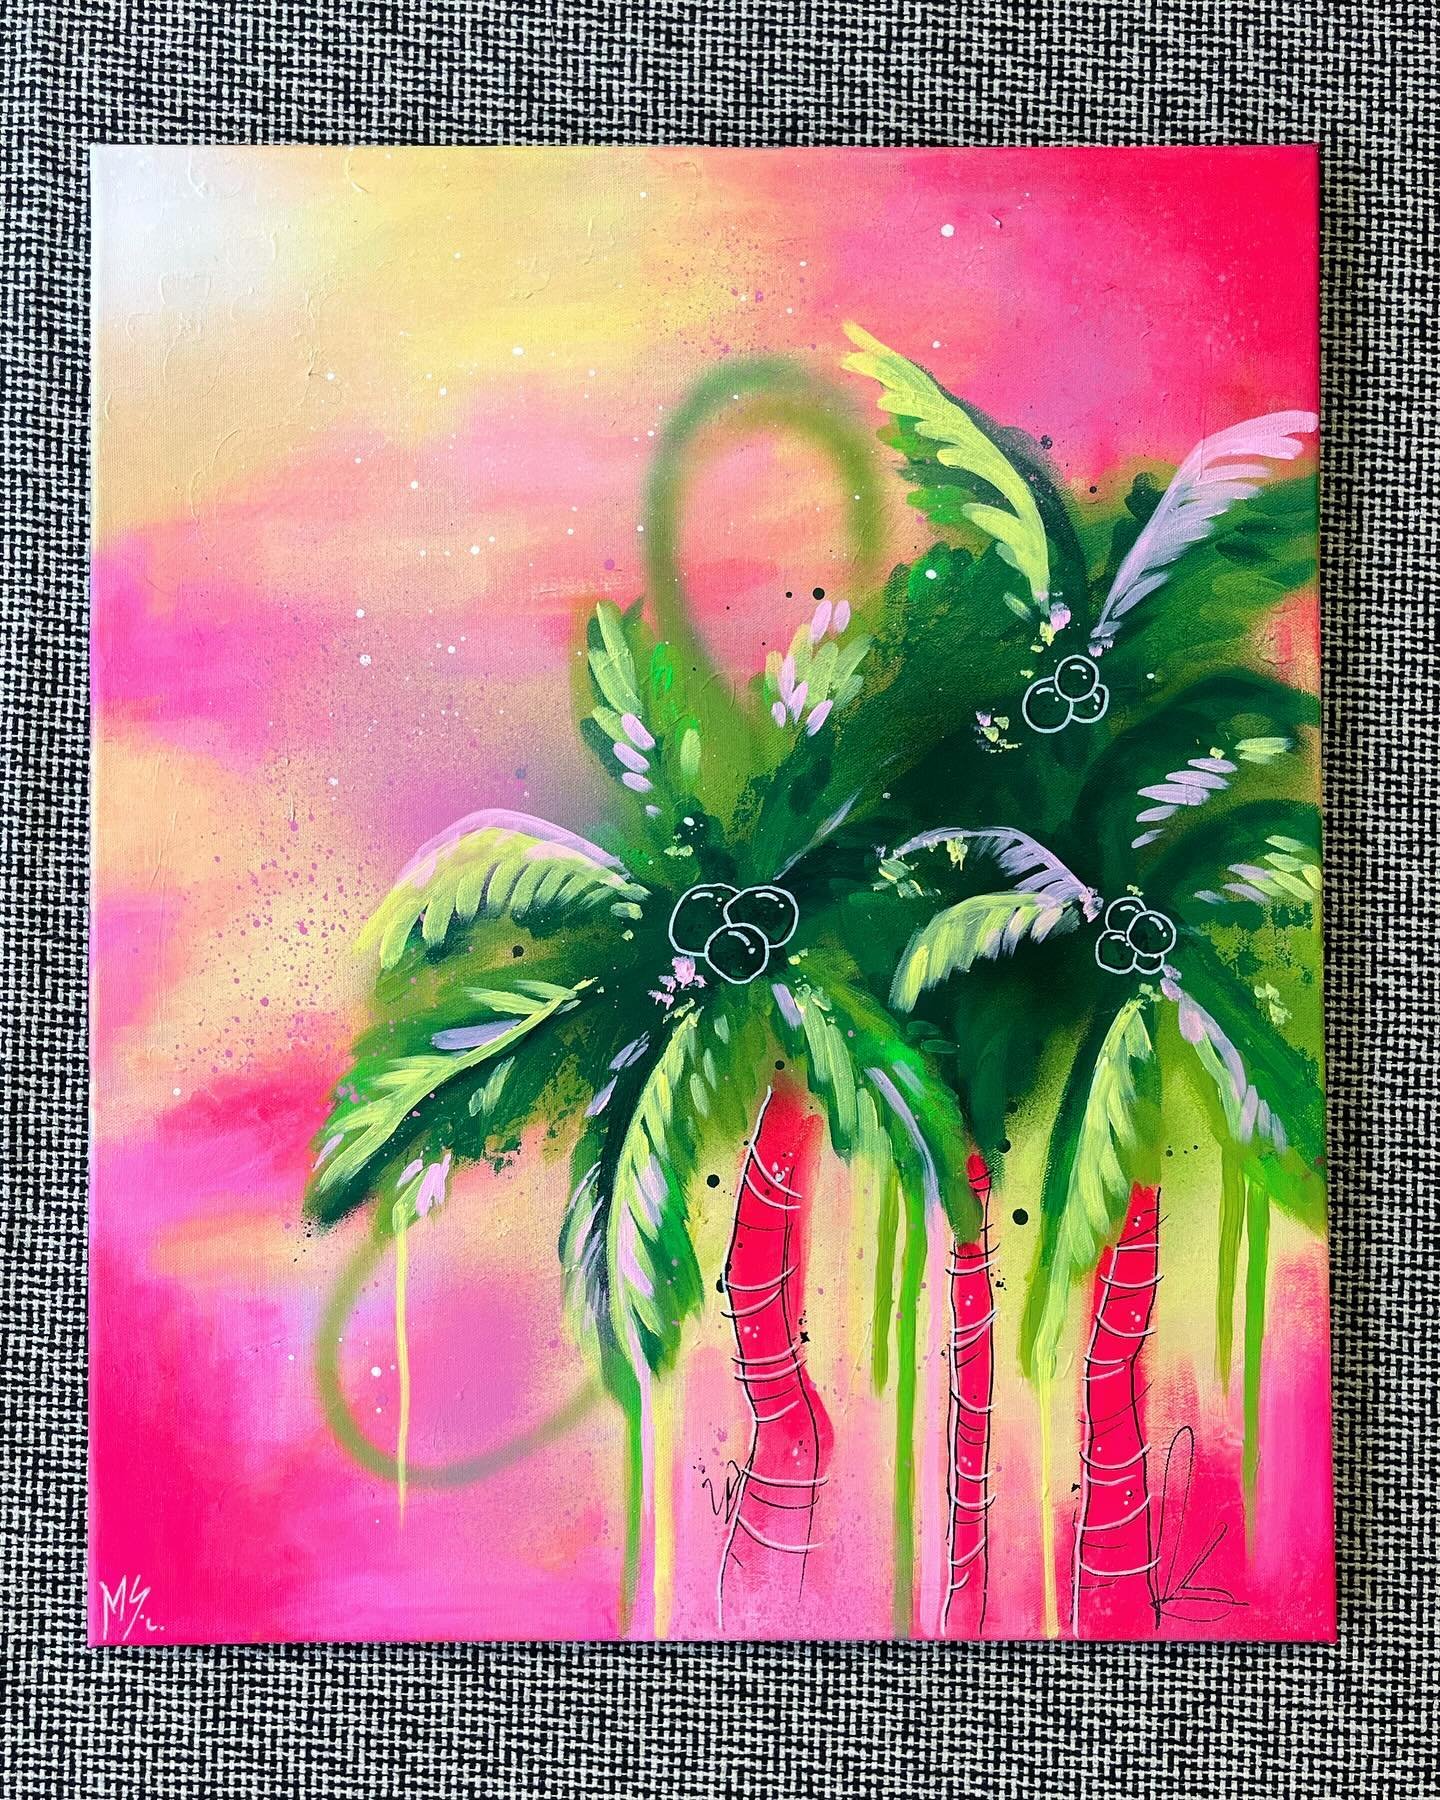 &rdquo;Breeze&rdquo;
Acrylics, spray paints and markers on canvas, 2024
54x65cm
490e

Available at millasipolaart.com or message me for details 🌴

&bull;
&bull;
#palmtrees #acrylicpainting #acrylicart #acrylicartwork #dreamyart #colorfulart #travela